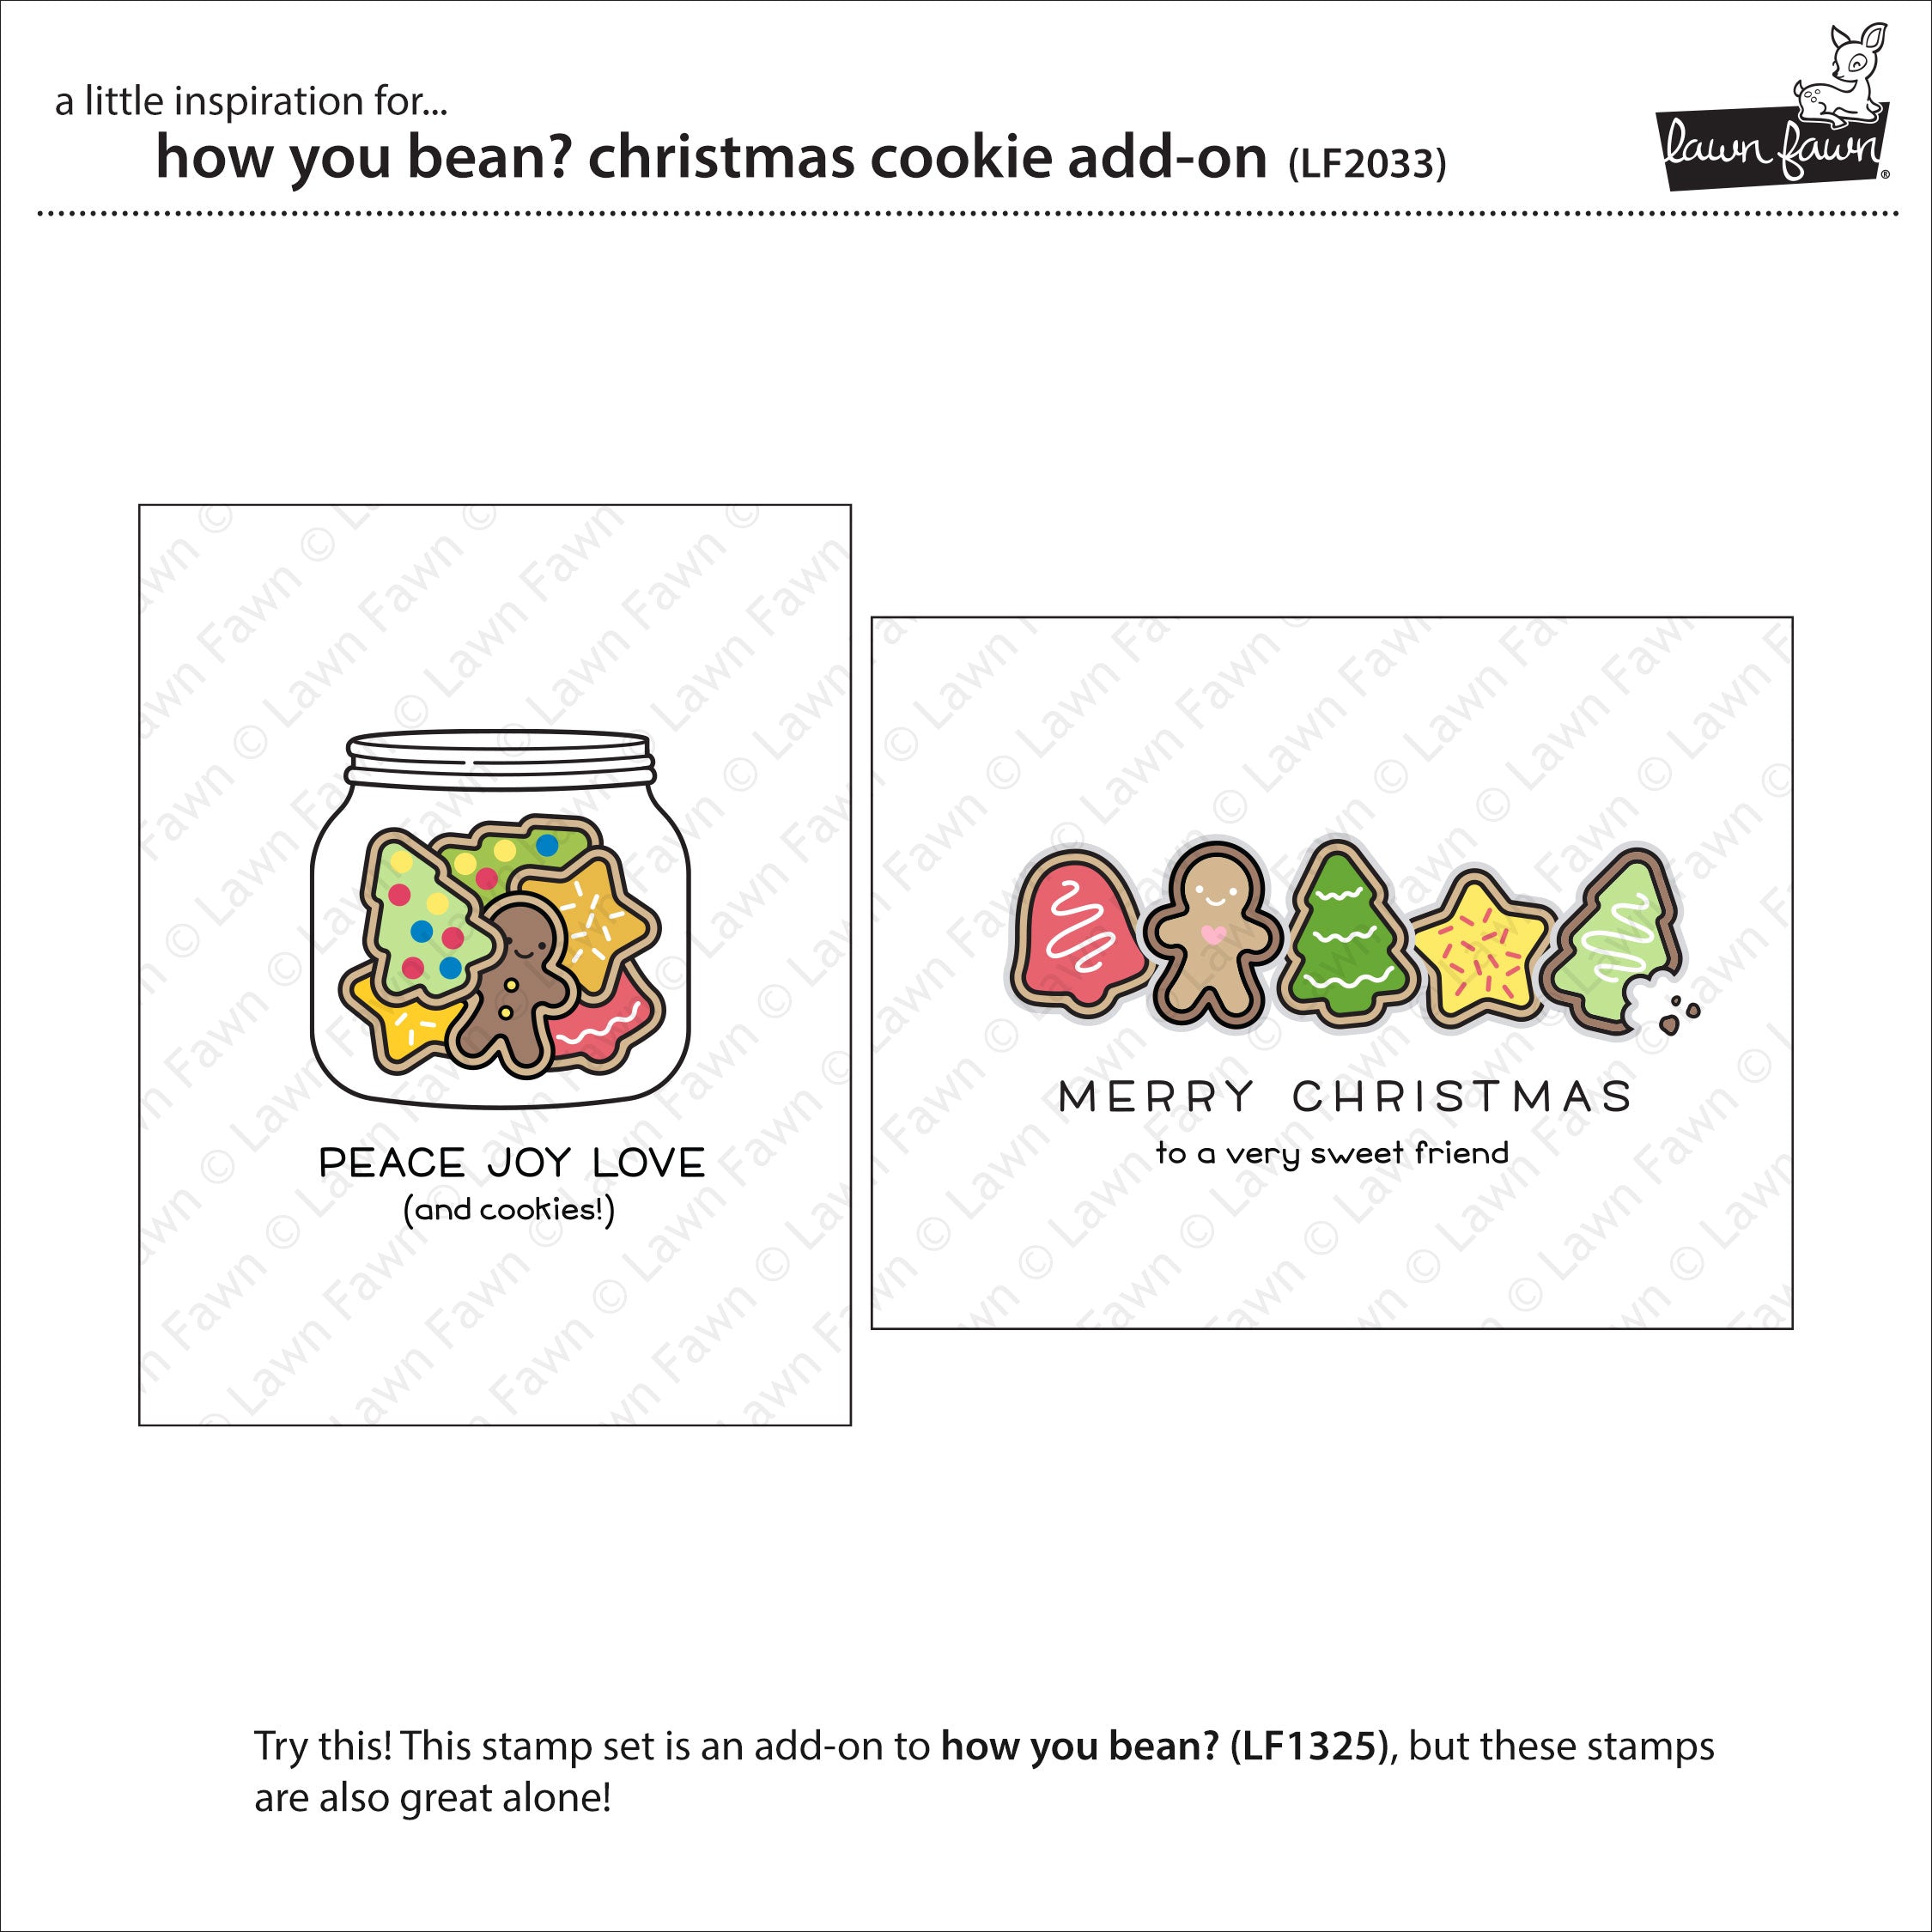 how you bean? christmas cookie add-on